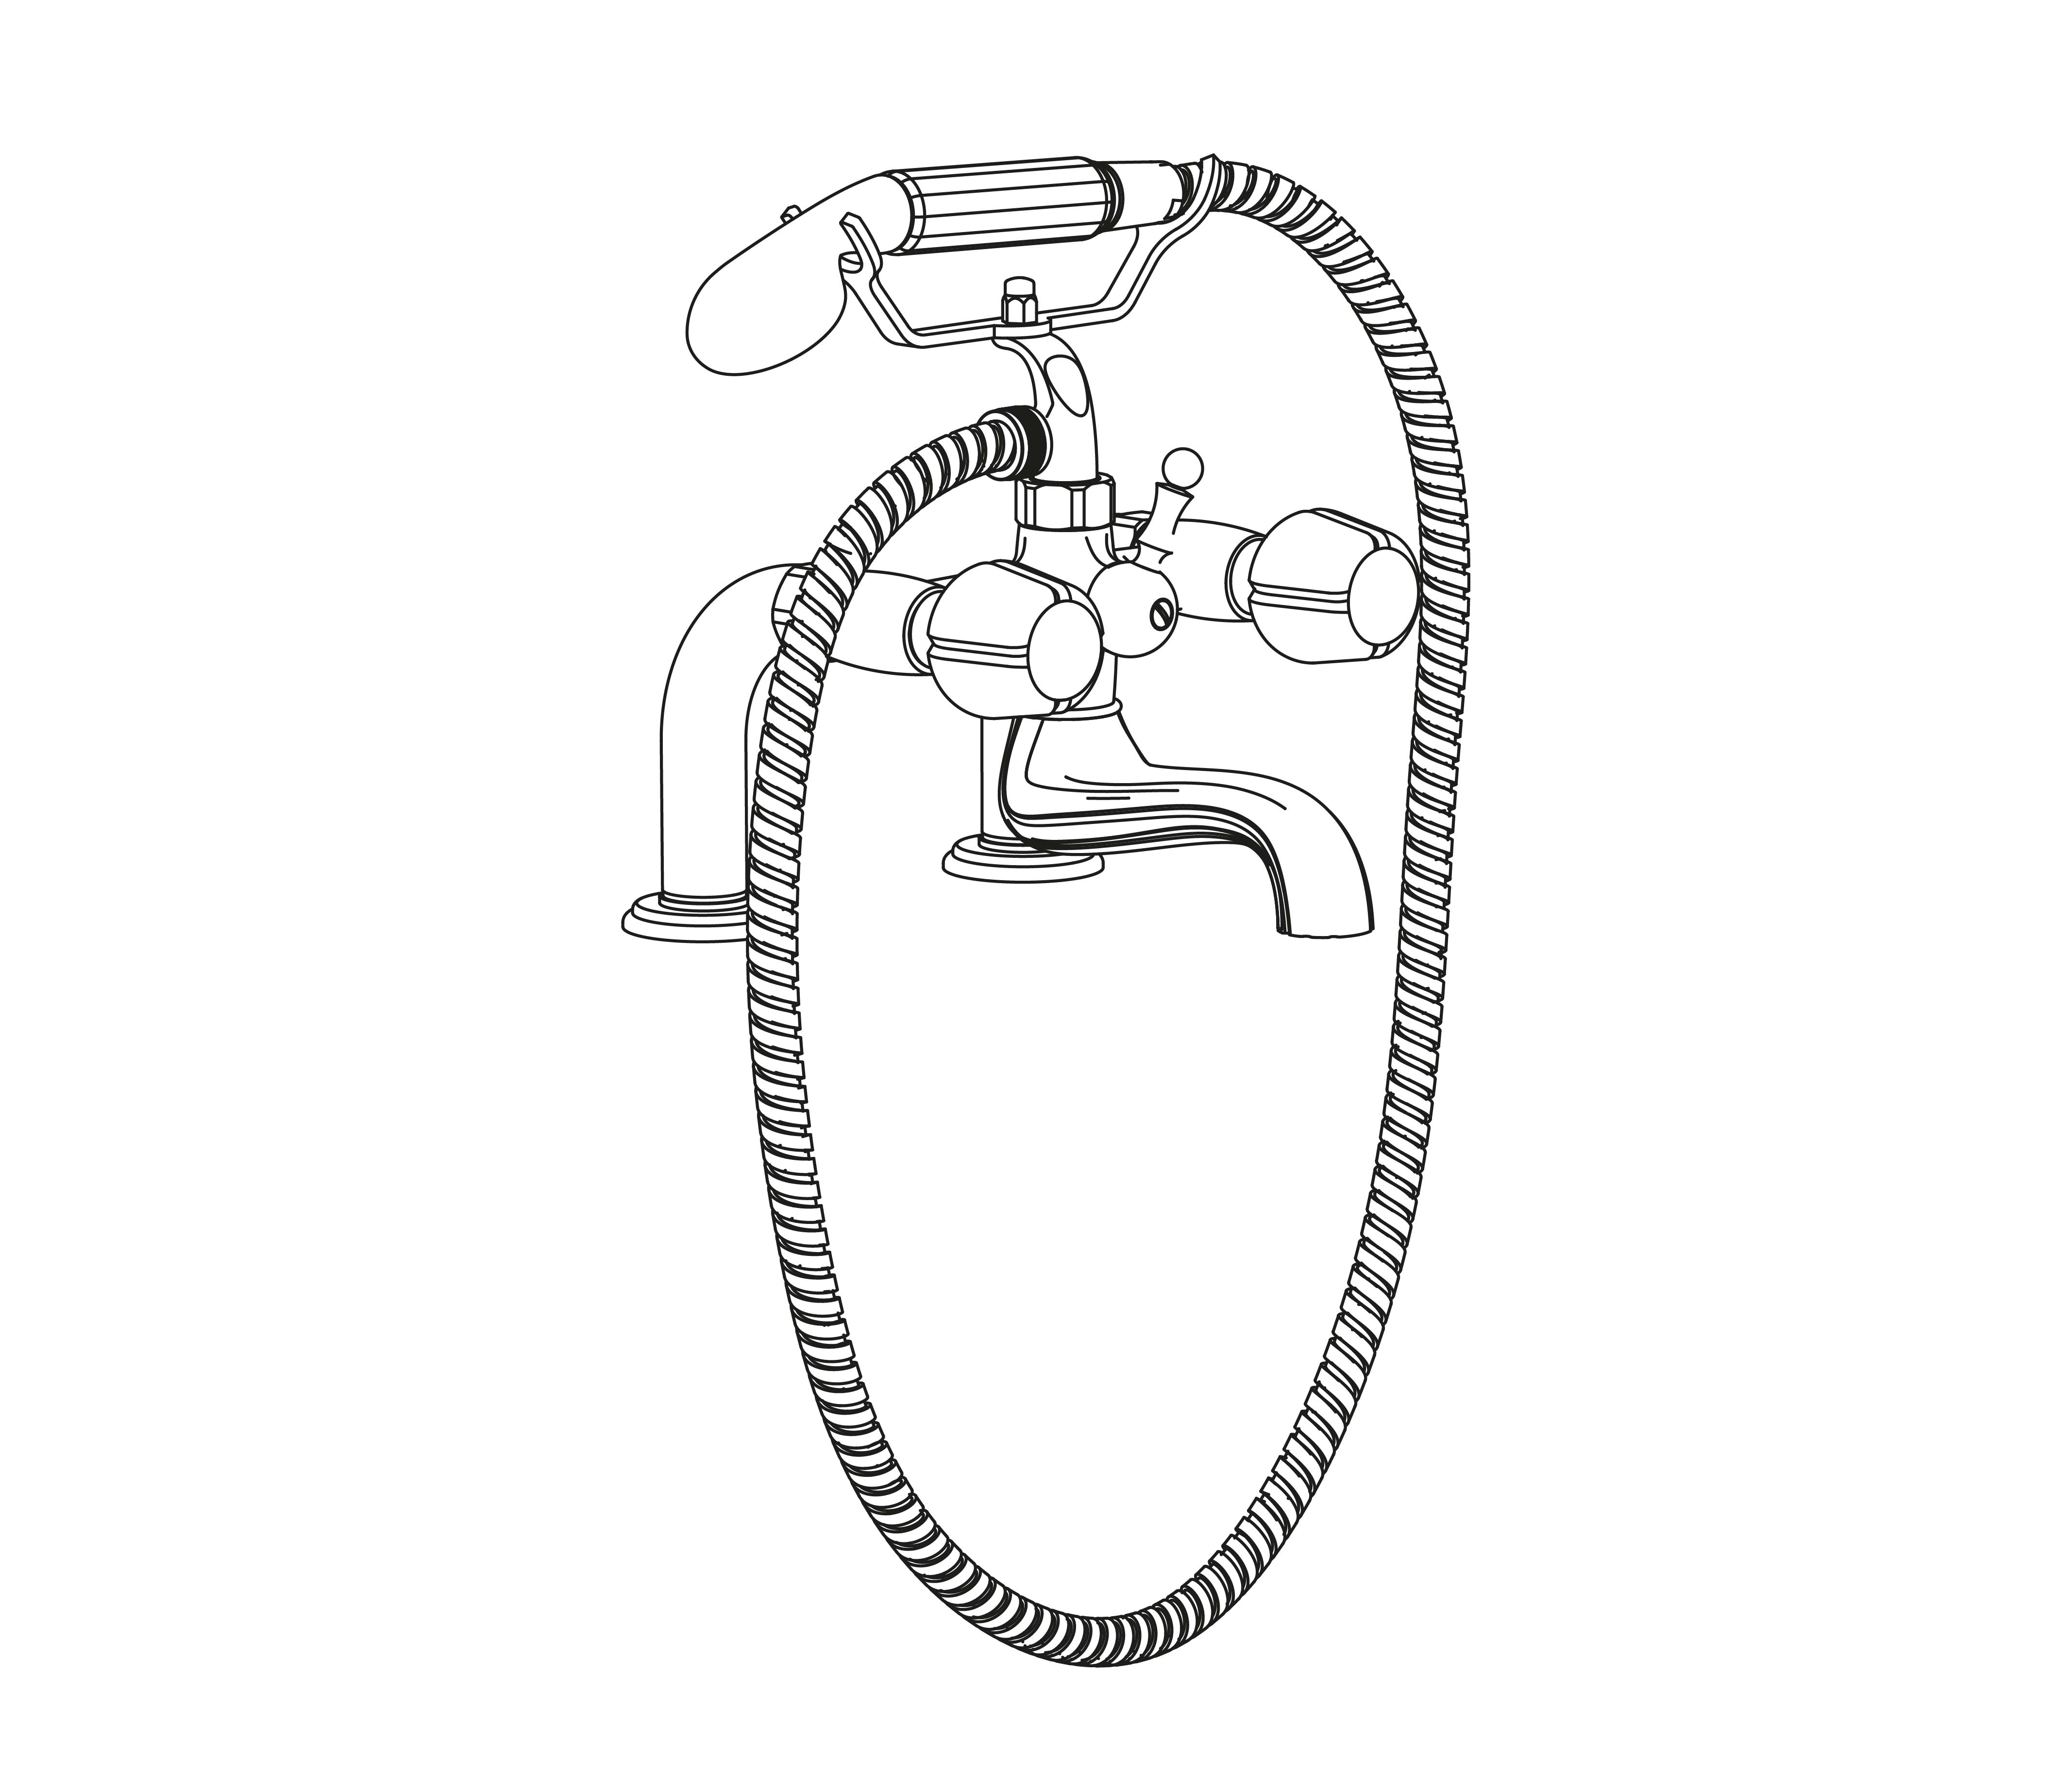 C41-3306 Rim mounted bath and shower mixer